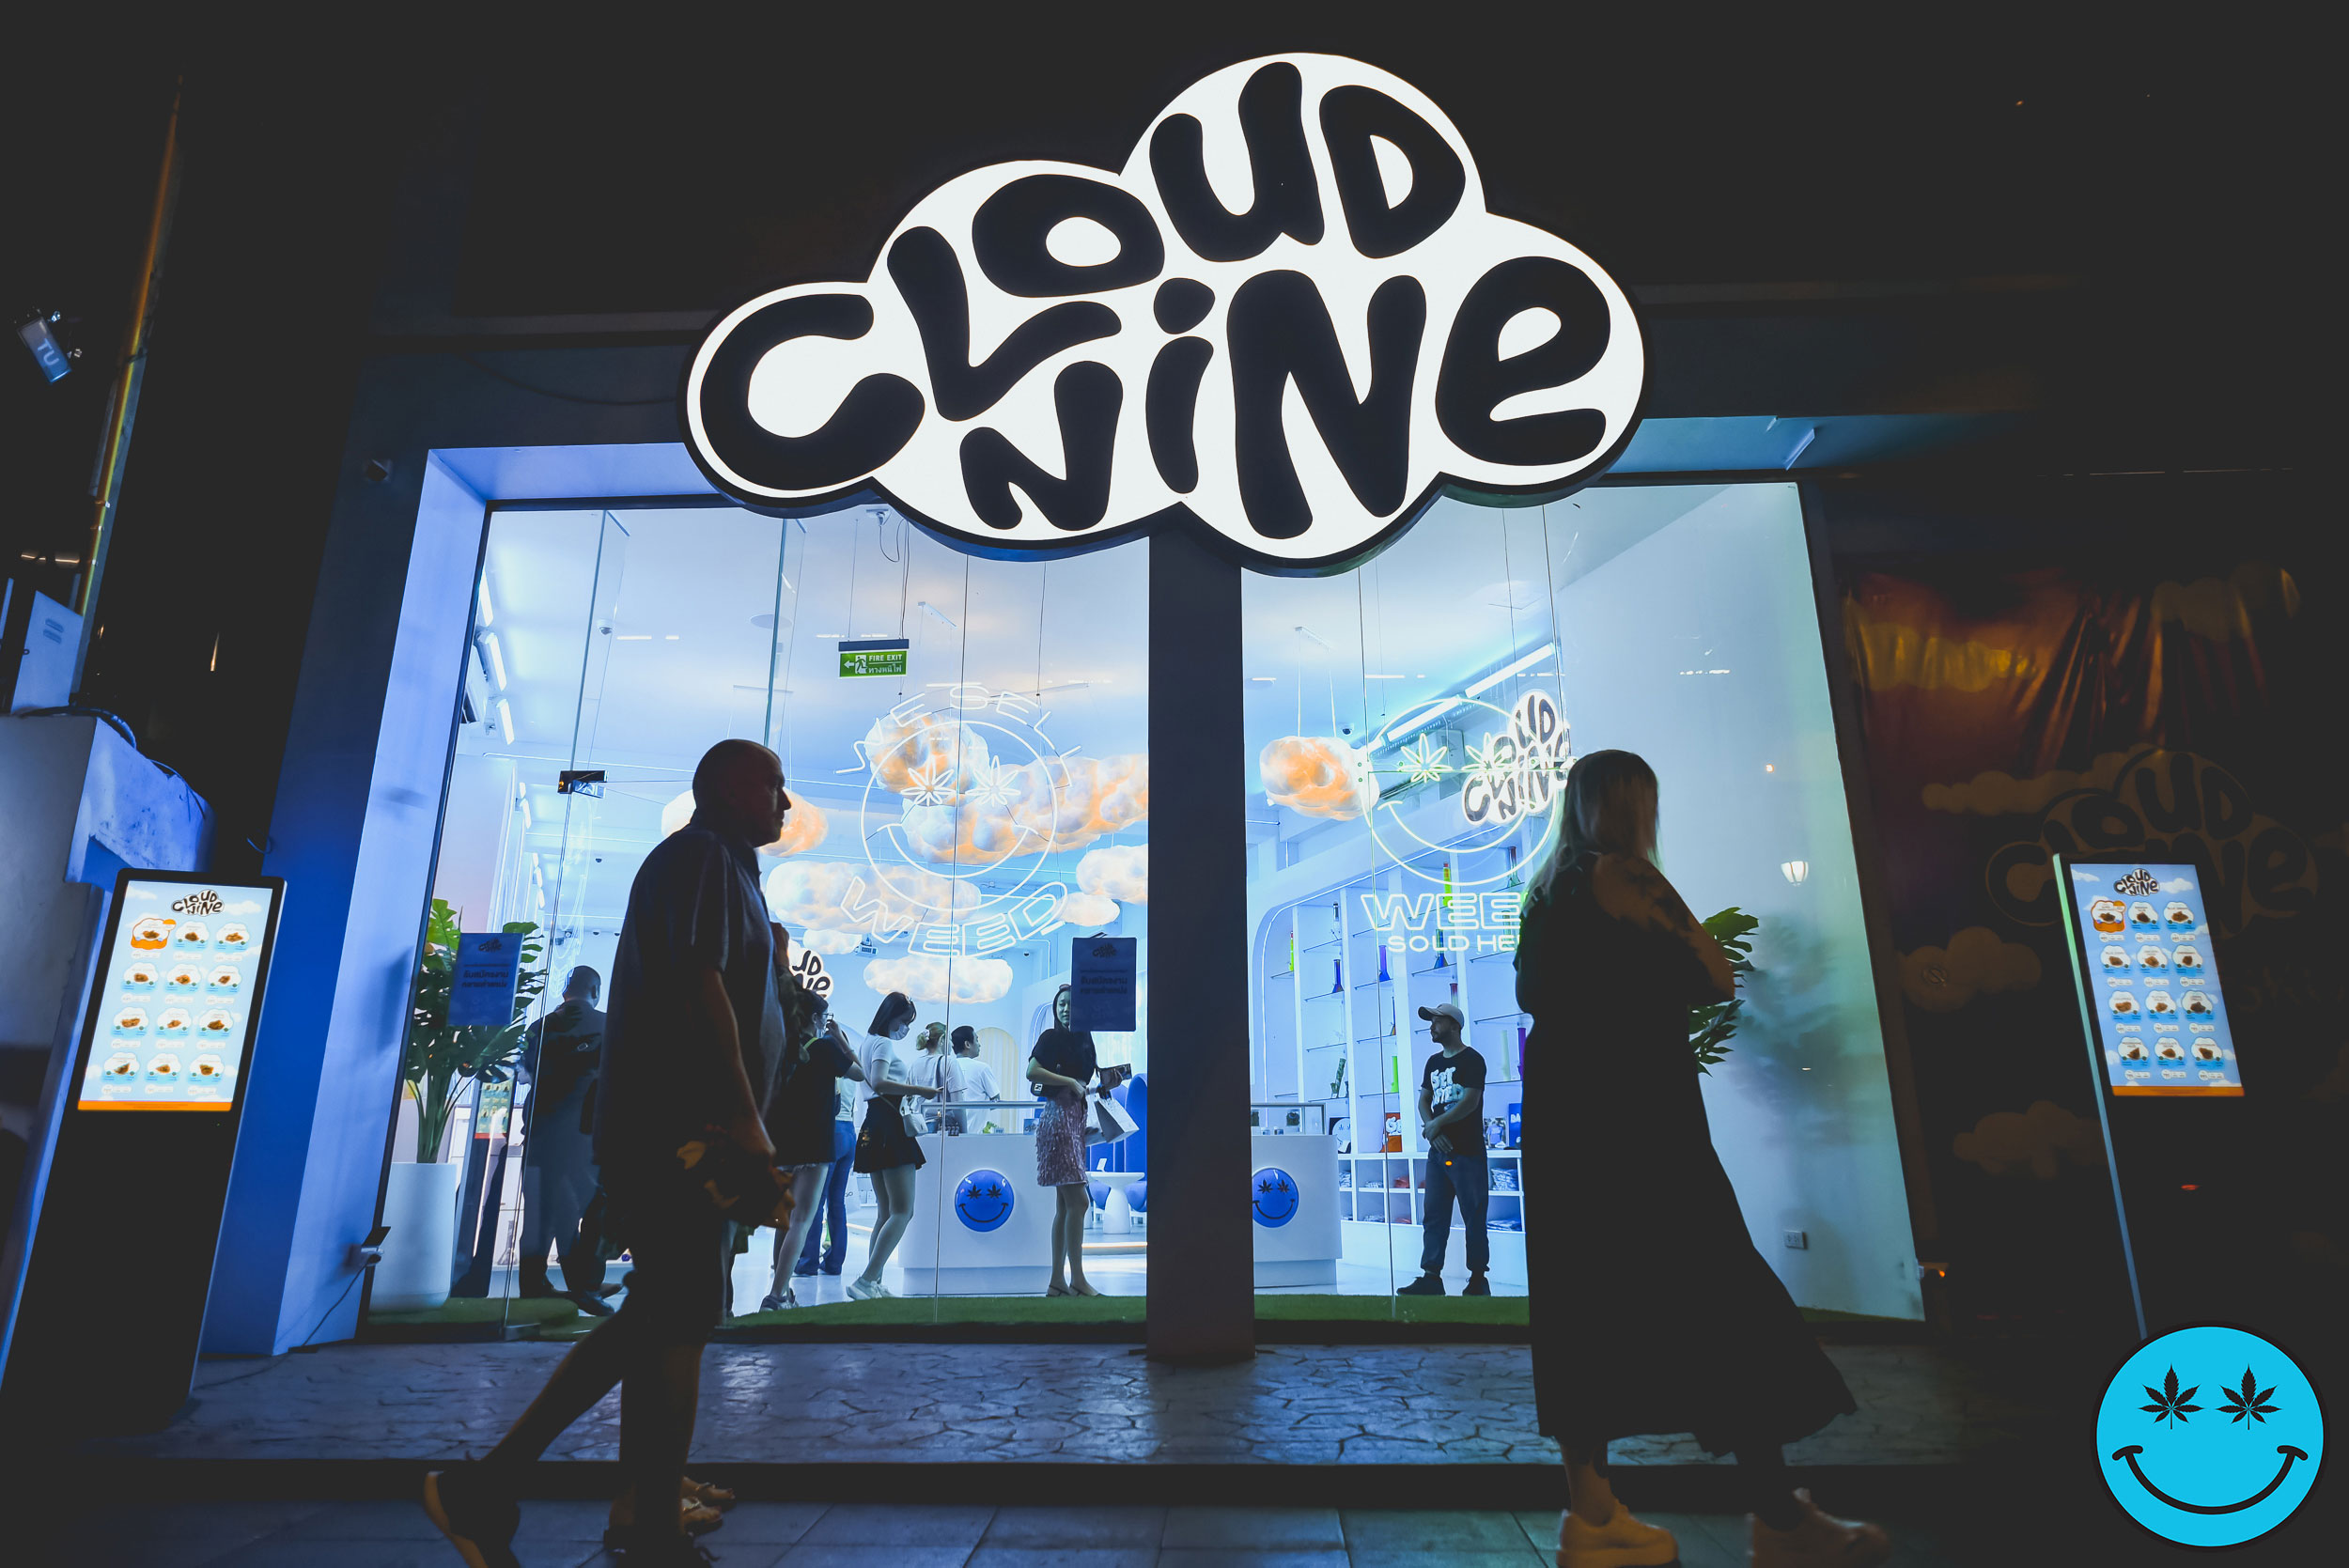 Cloud Nine Celebrates their “GET LIFTED” Grand Opening Wednesday March 1st,  2023